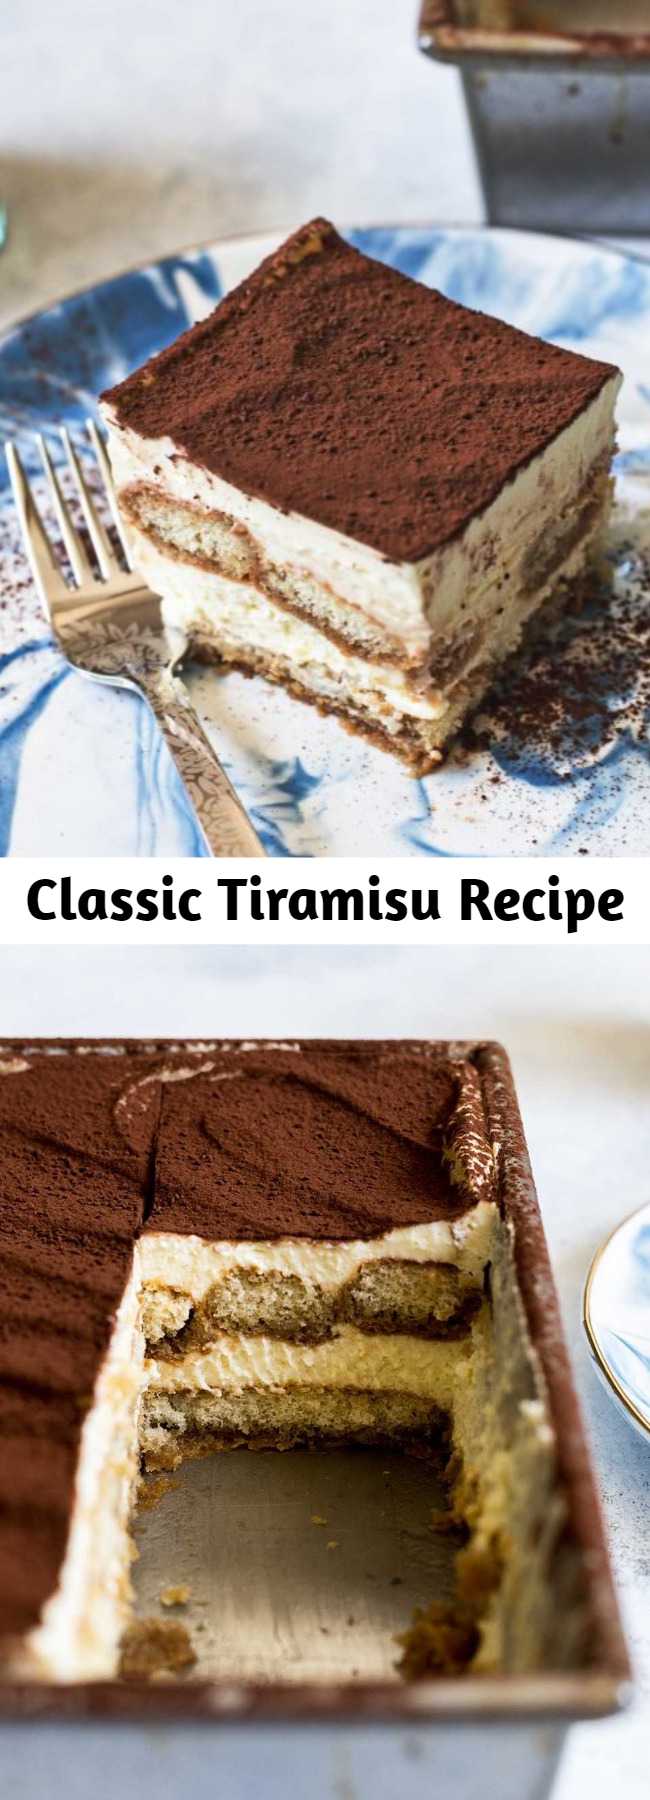 How to make Classic Tiramisu. Made with whipped egg yolks, sugar, rum, mascarpone, and whipped cream, layered with coffee-dipped ladyfingers. Great make-ahead dessert for Christmas, Thanksgiving, and holiday parties. #tiramisu #dessert #holiday #christmas